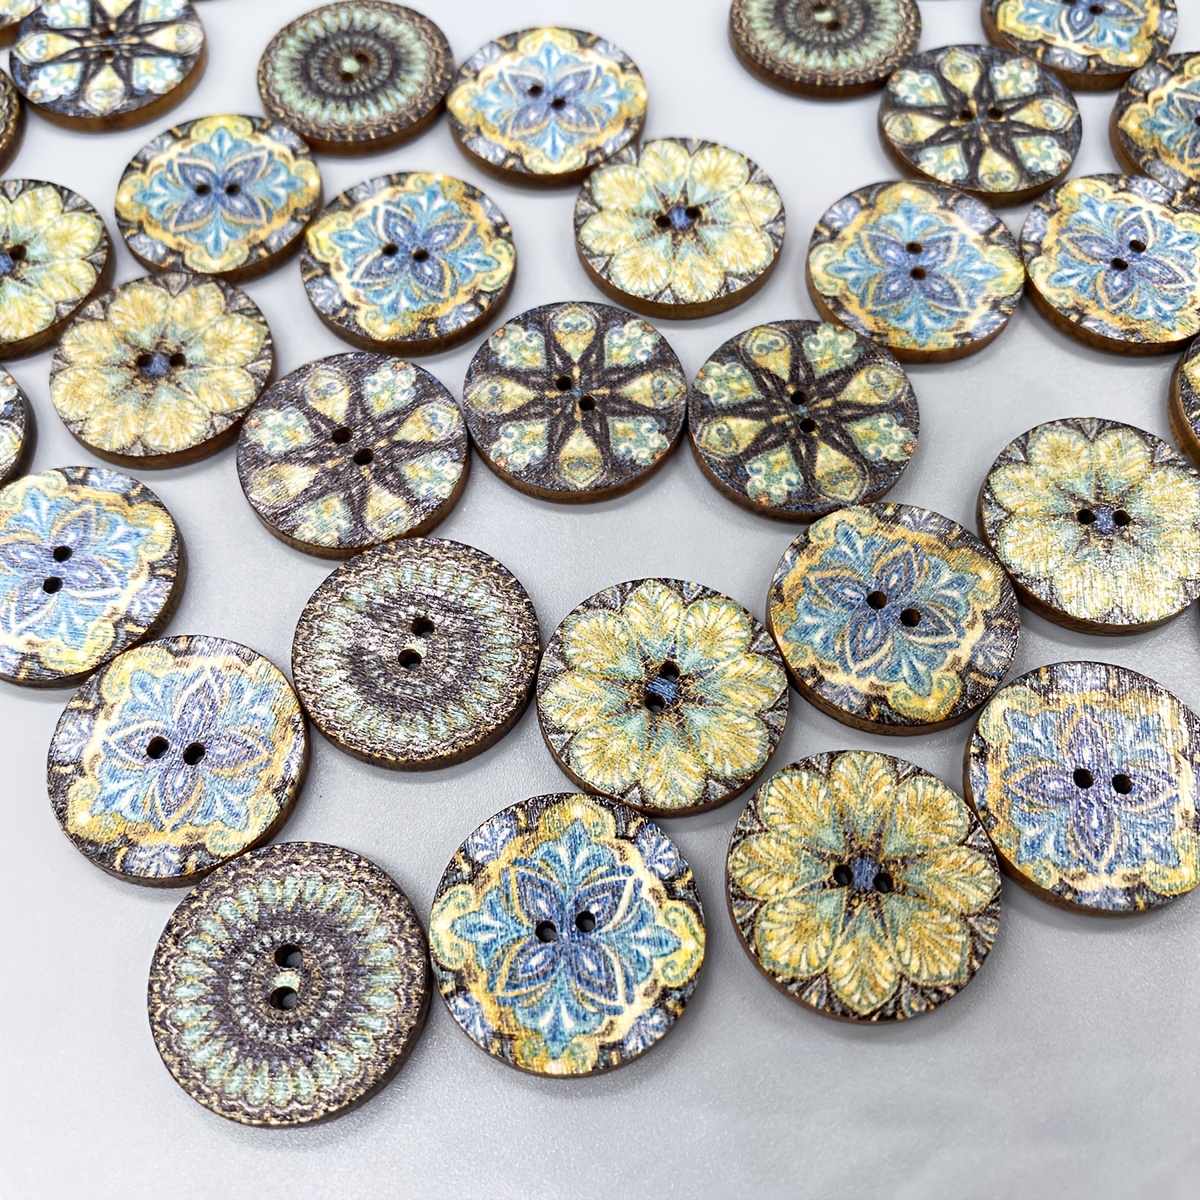  Wepetyo 400 Pcs Wooden Buttons,Many Styles Decorative Sewing  Button,Buttons for Crafts,2 Holes Round Decorative Painted Wood  Buttons,Cute Buttons,3D Buttons for DIY Sewing(20mm,15mm,25mm)